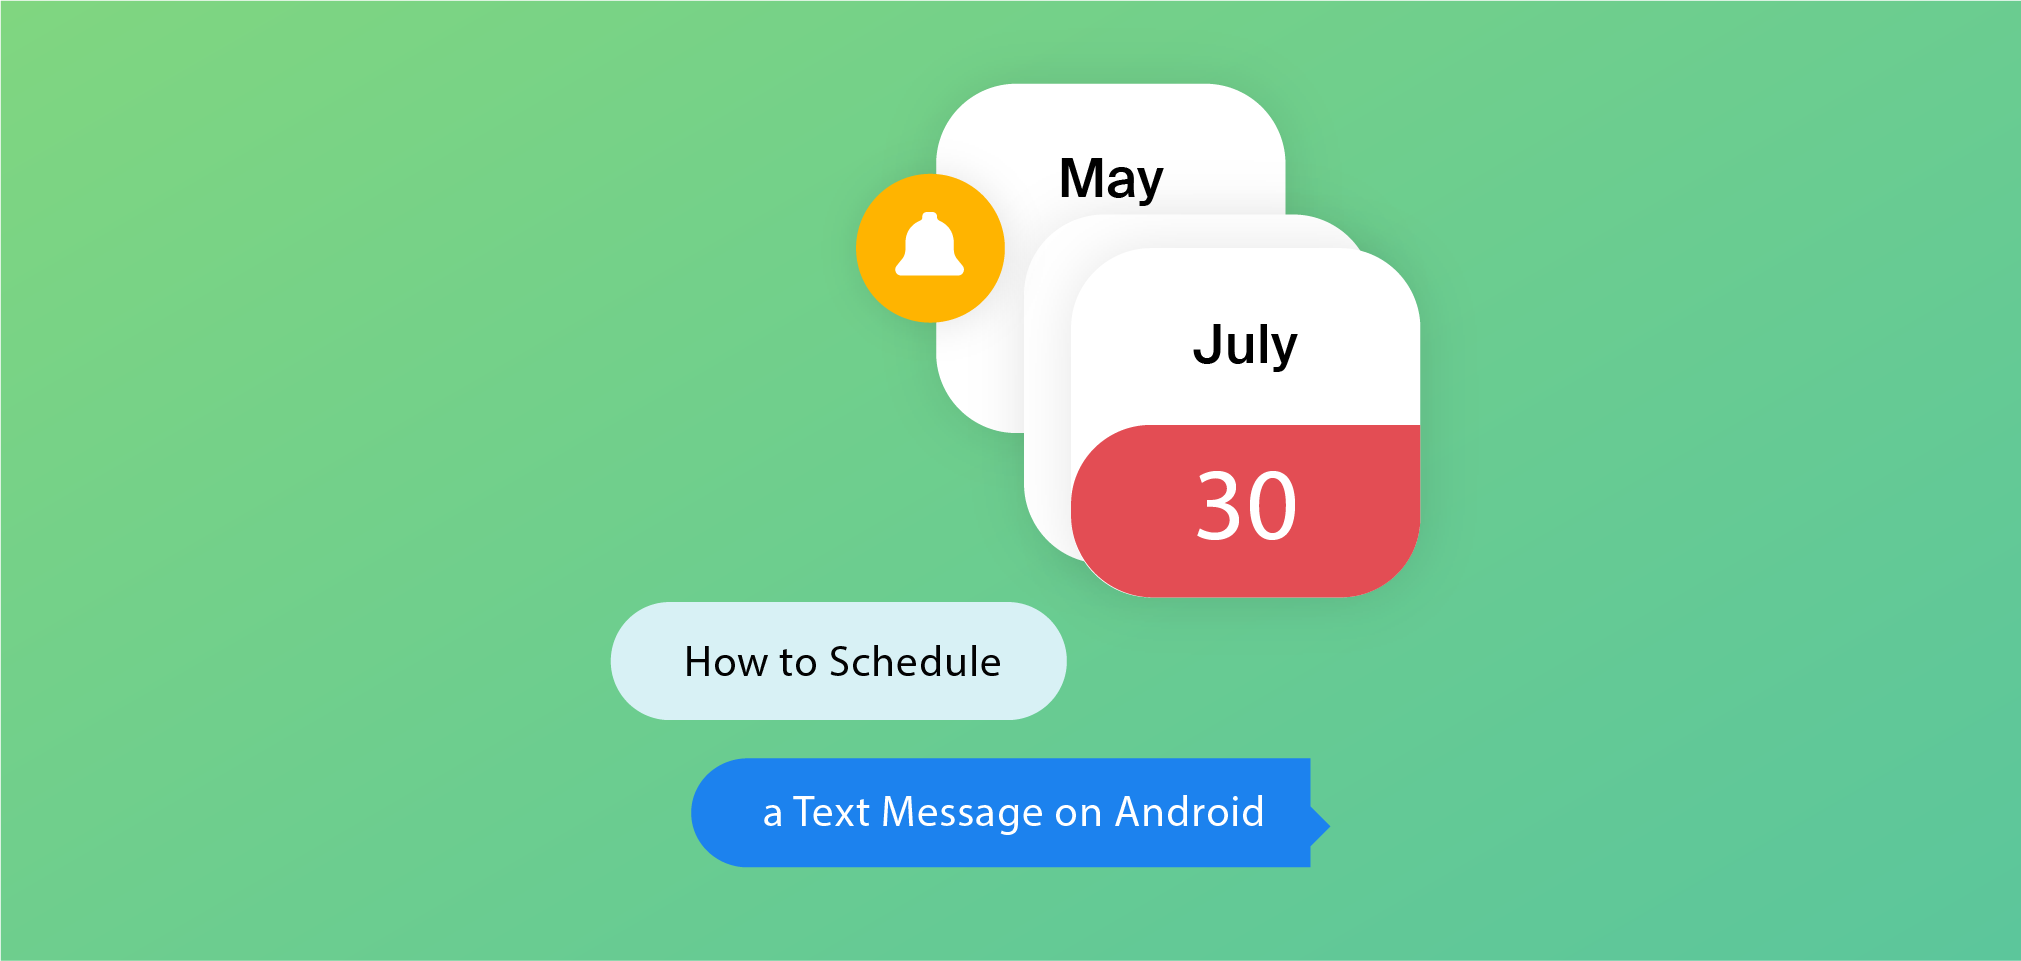 Schedule a Text Message on Android